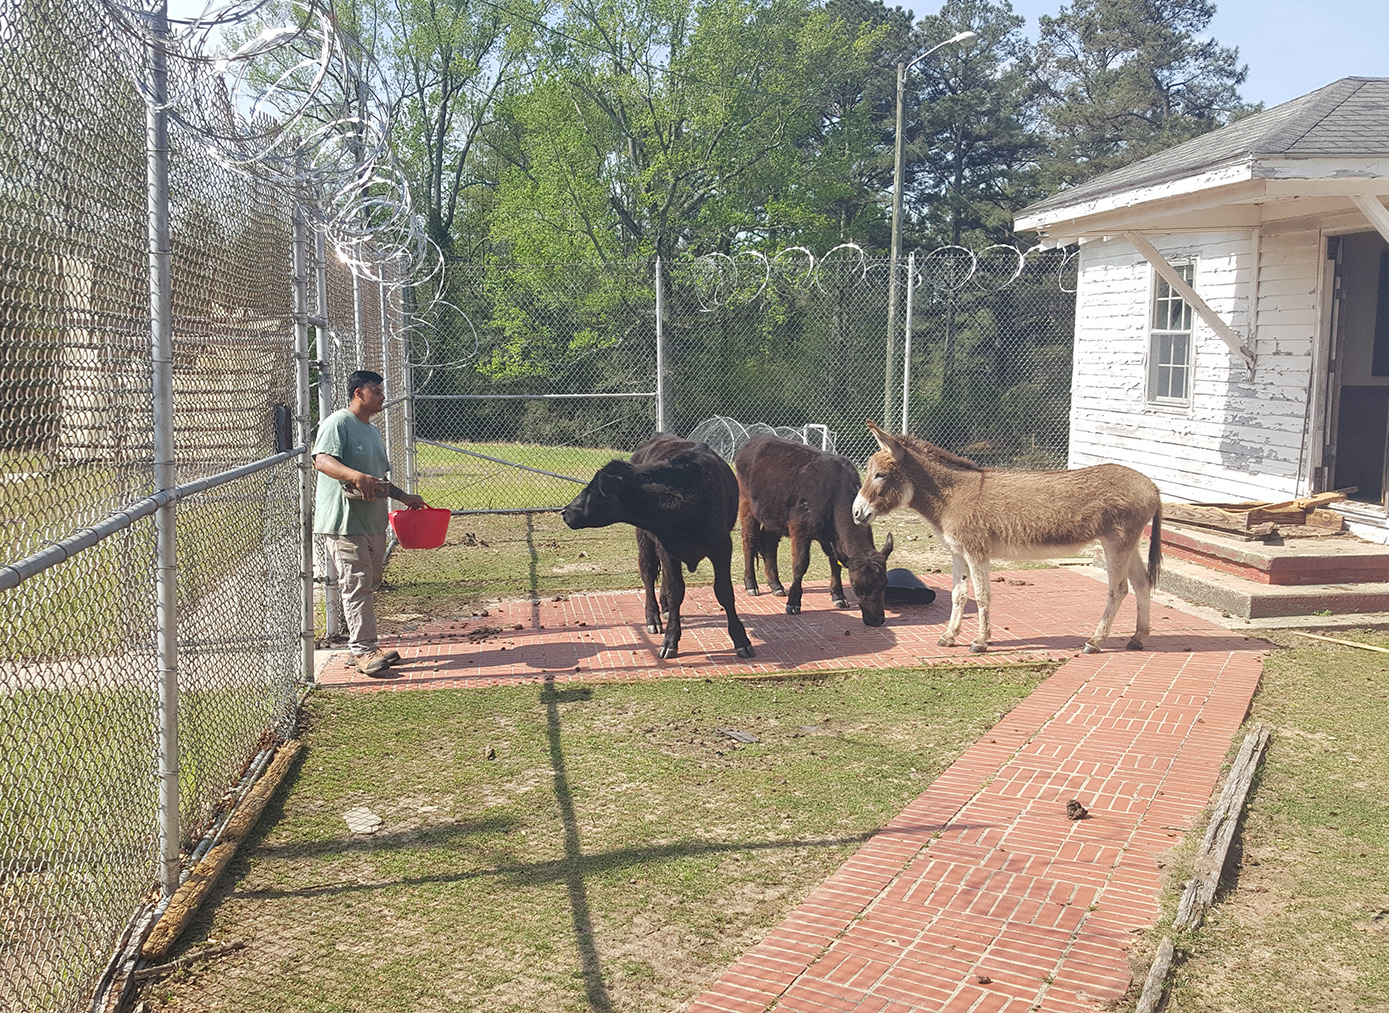 Ezekiel Jones, Operational Coordinator, coaxes the animals out to pasture in the morning. GrowingChange's donkey, Miss Easter, was born on Easter Sunday five years ago.